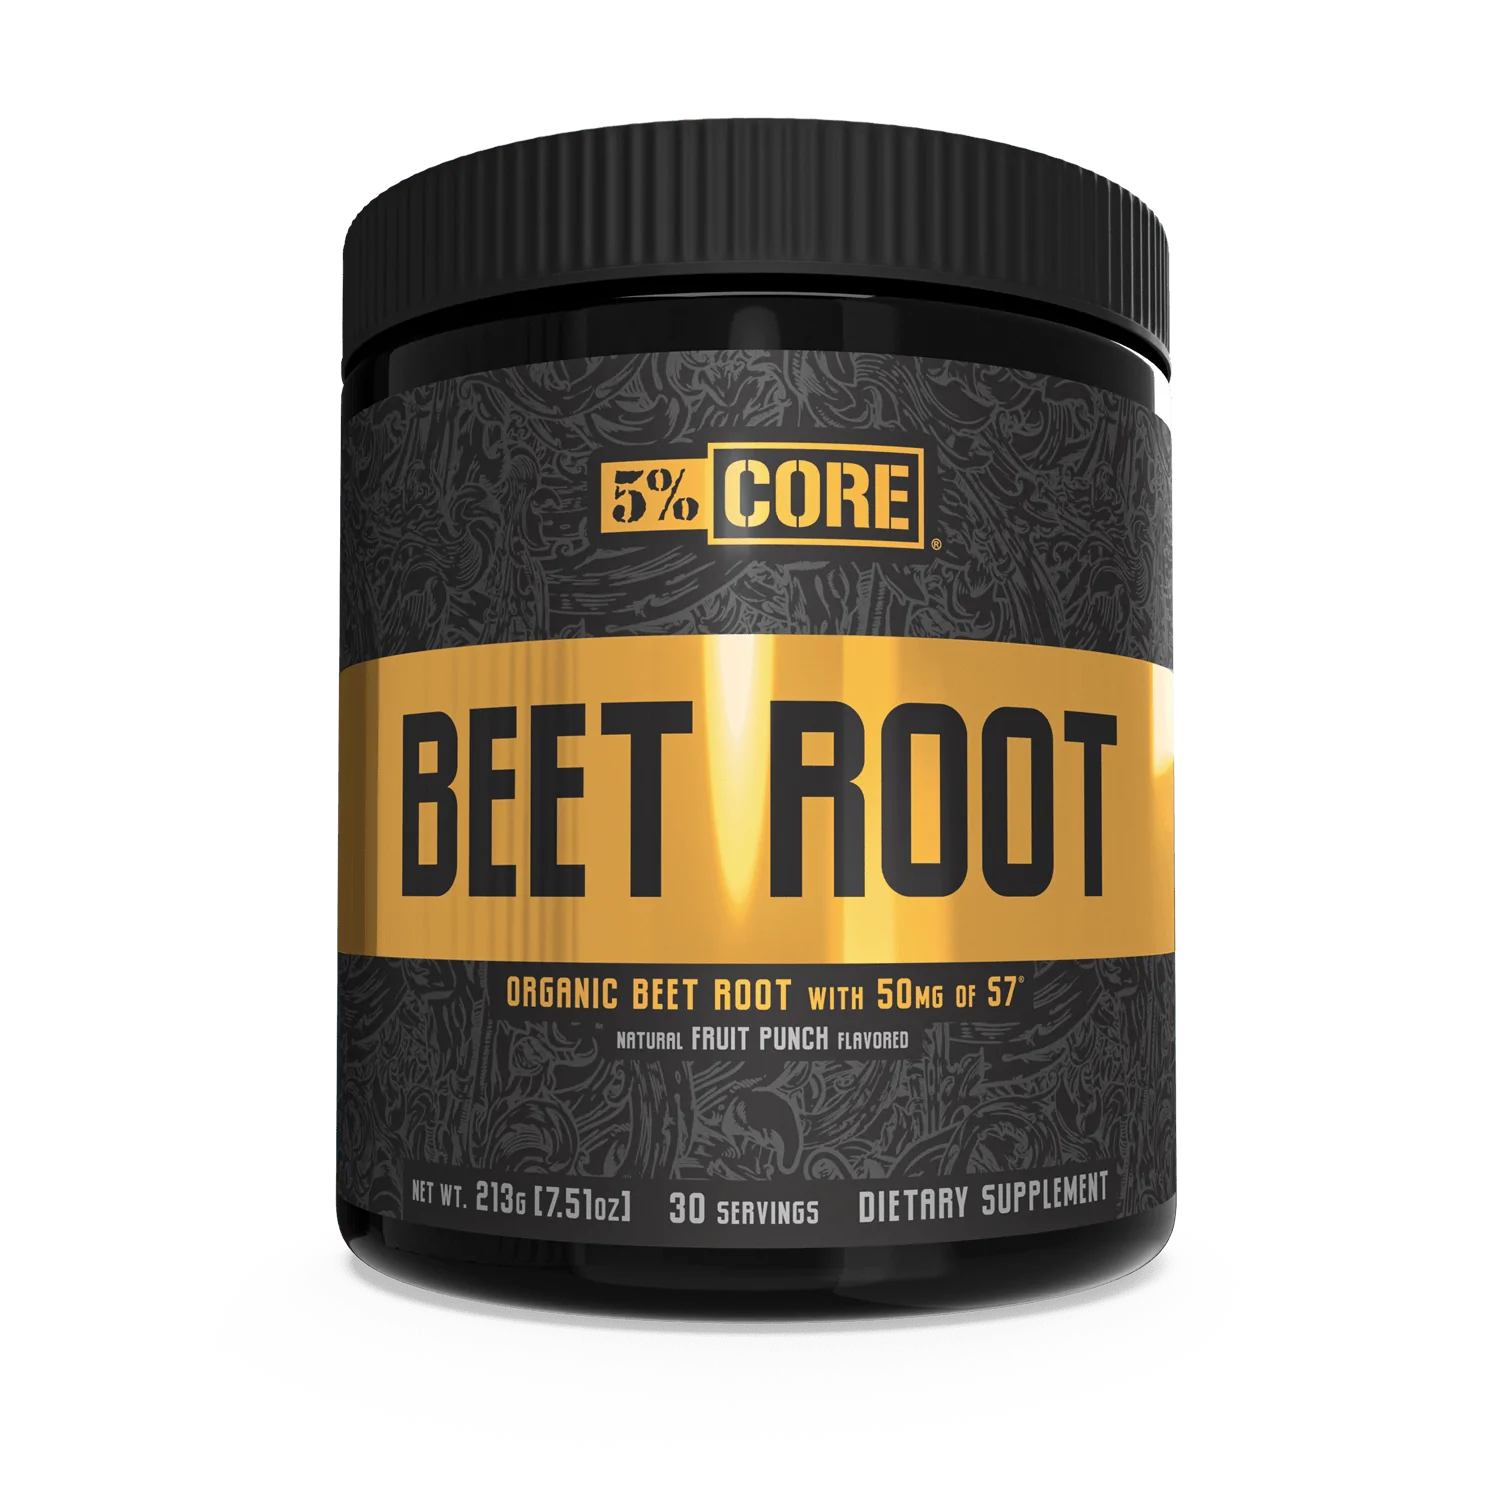 Beet Root 312g Max Muscle Orlando